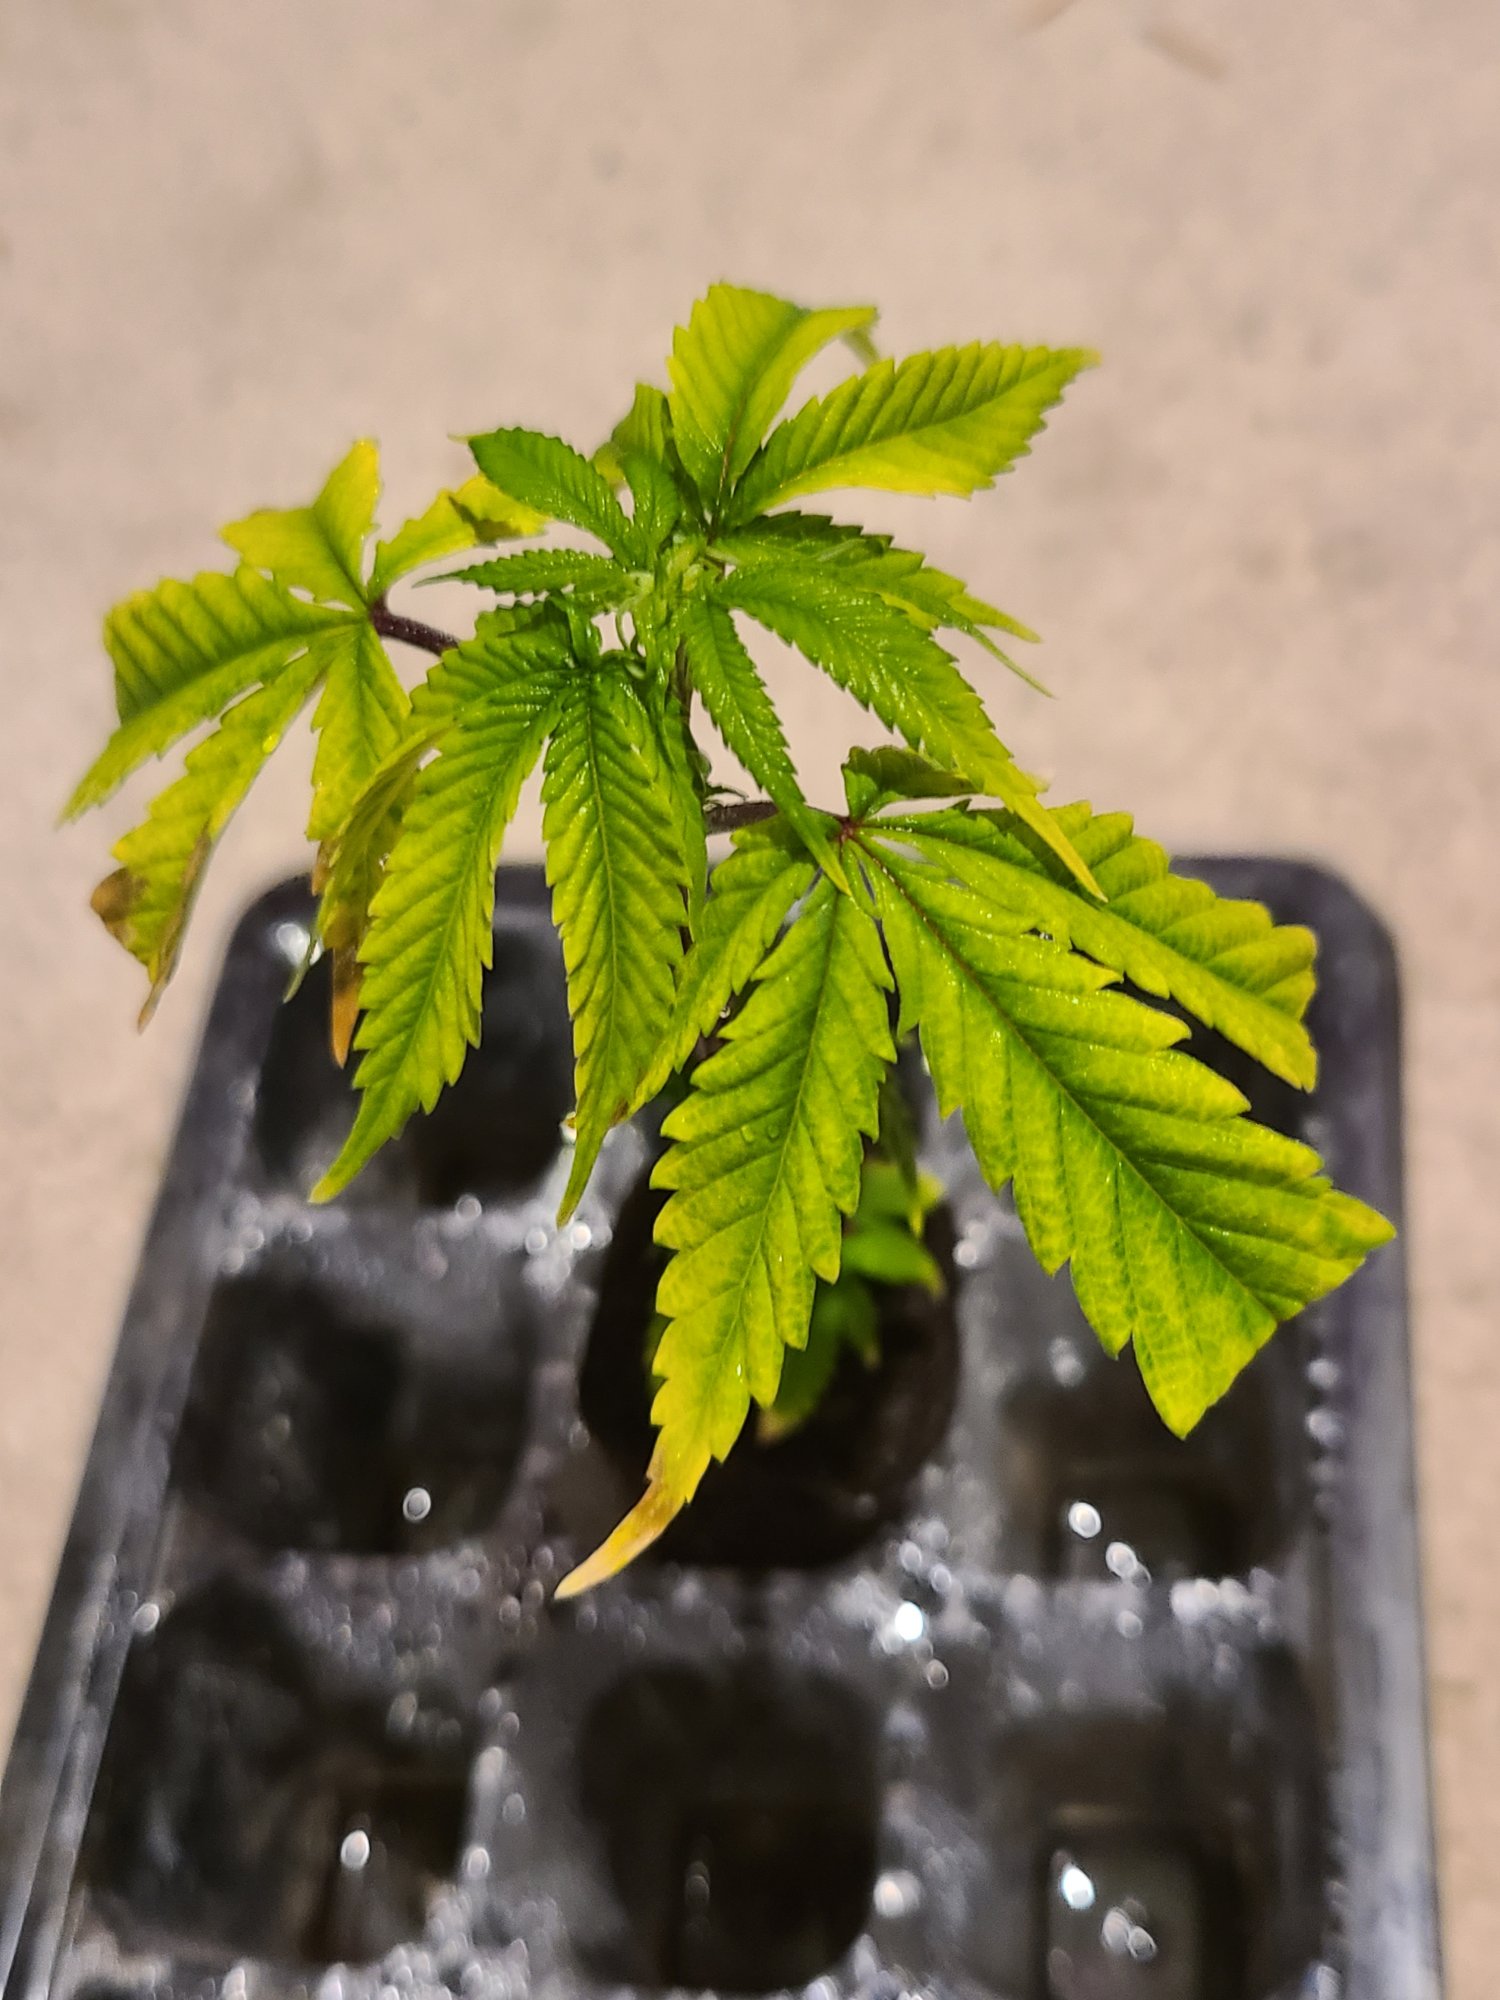 Help with clones and rooting 2